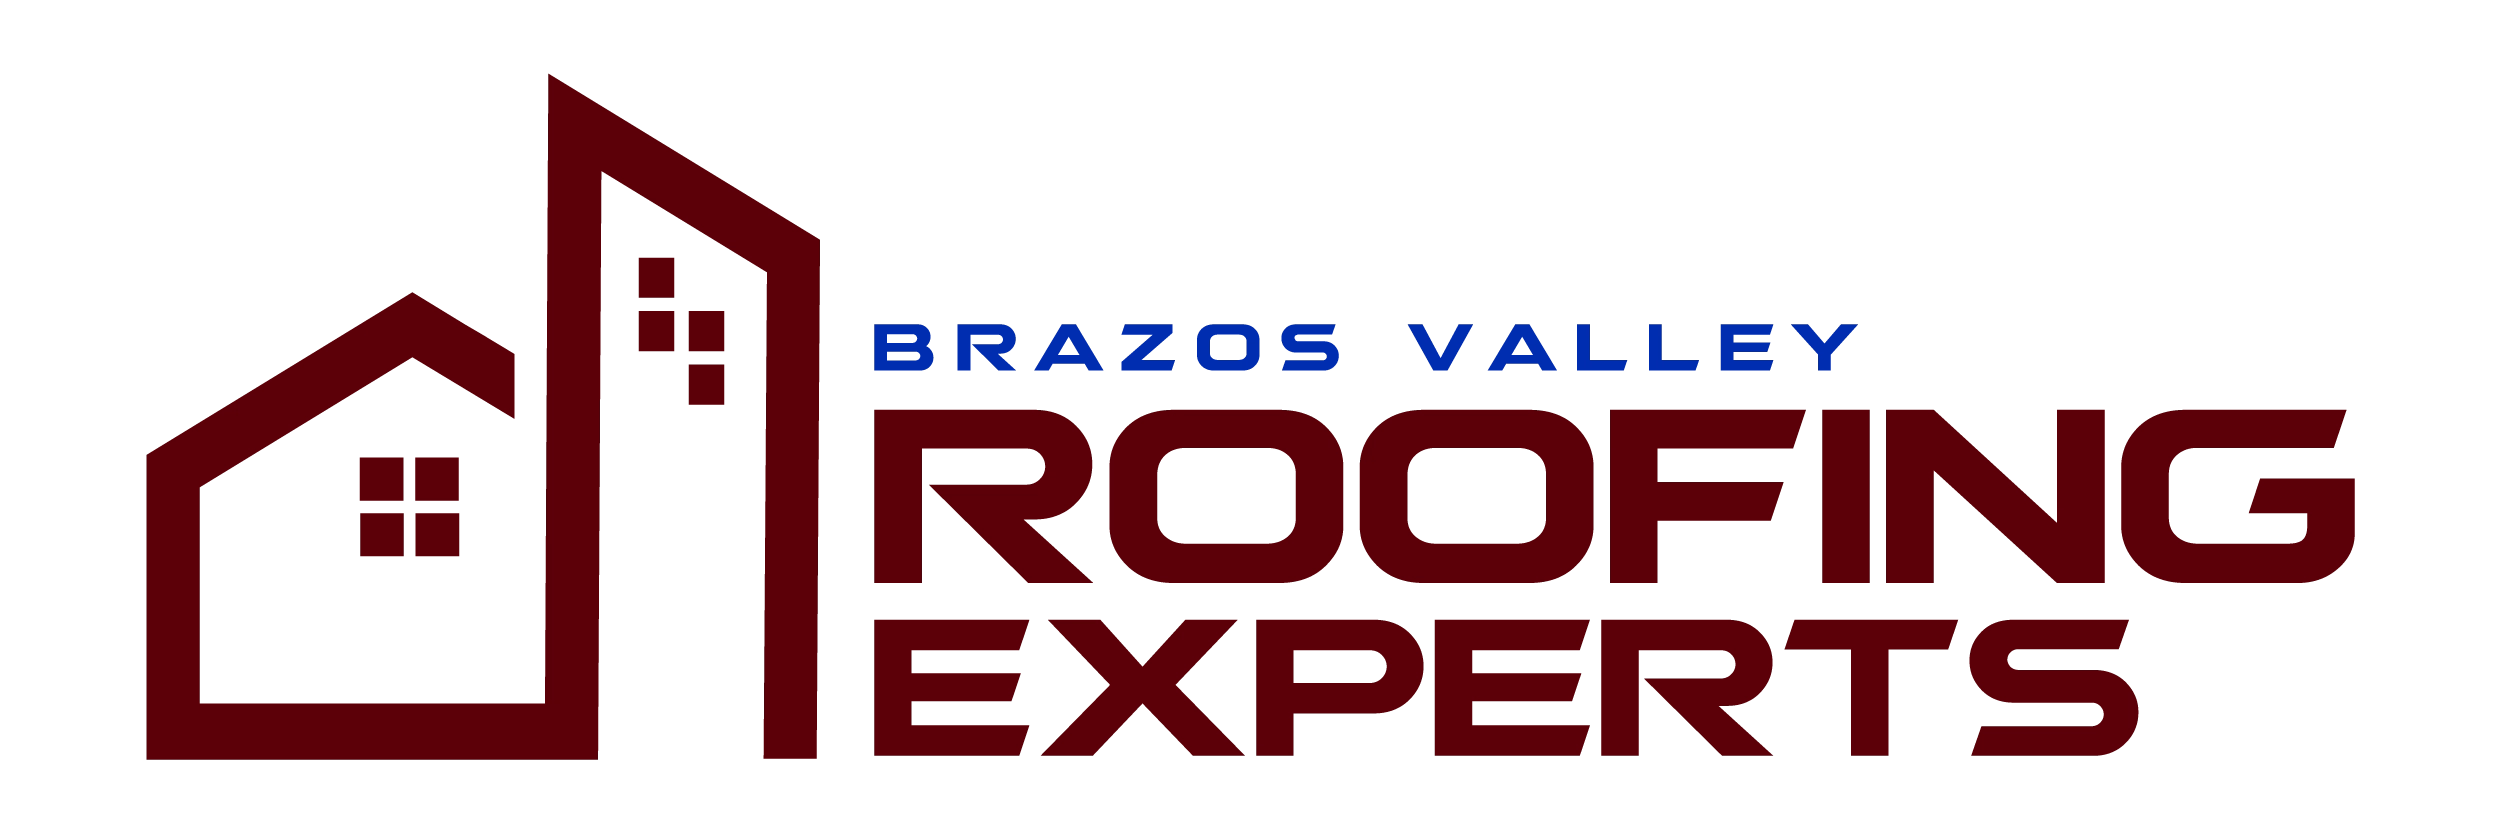 Brazos Valley Roofing Experts Logo